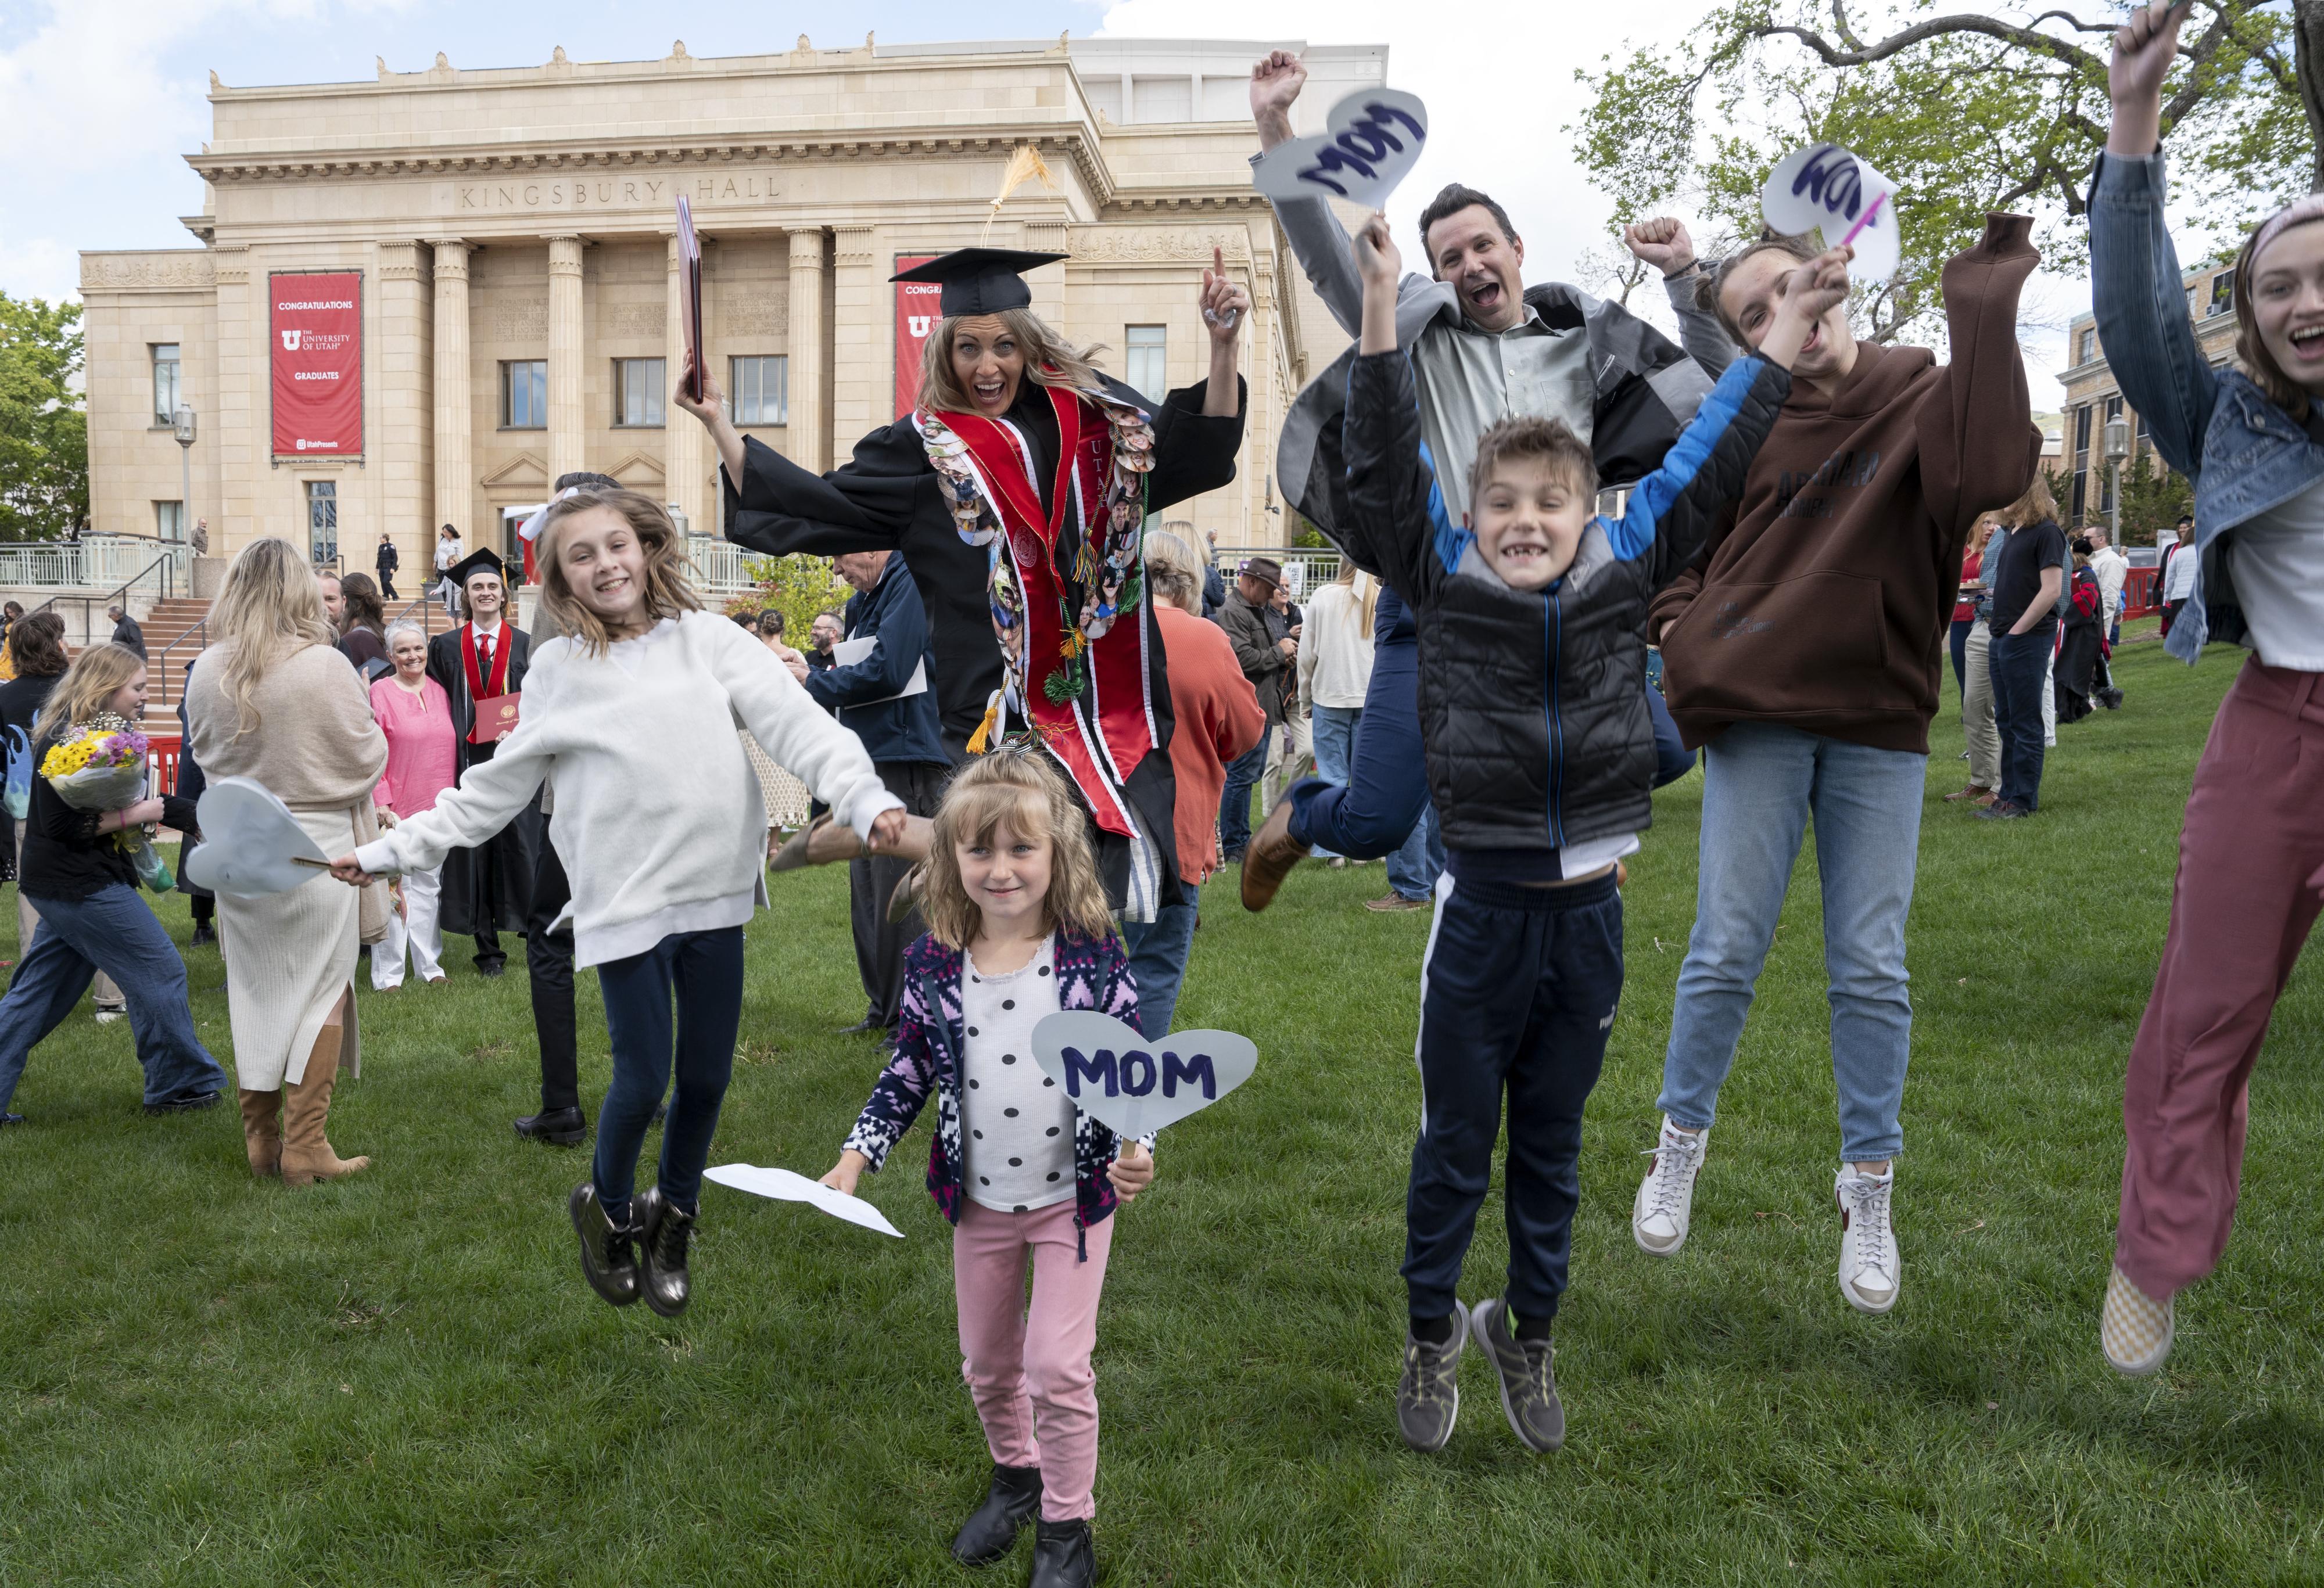 A graduate jumps in celebration with family members